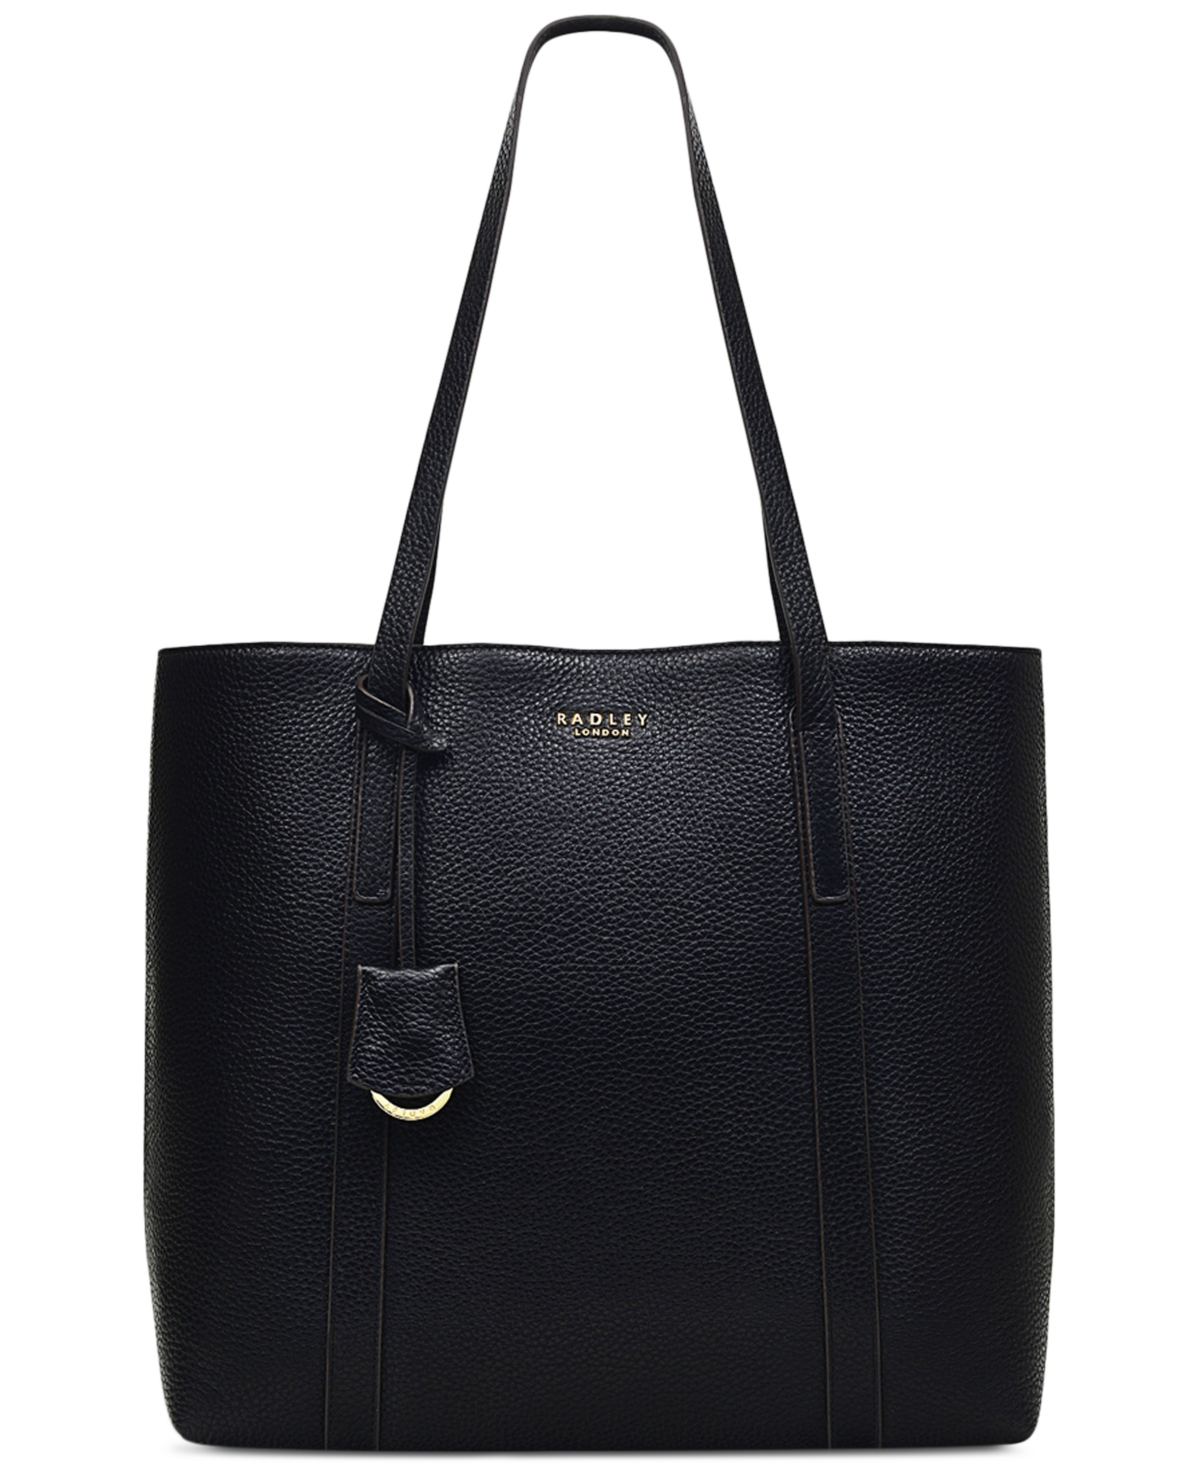 Museum Street Large Open Top Tote - Black